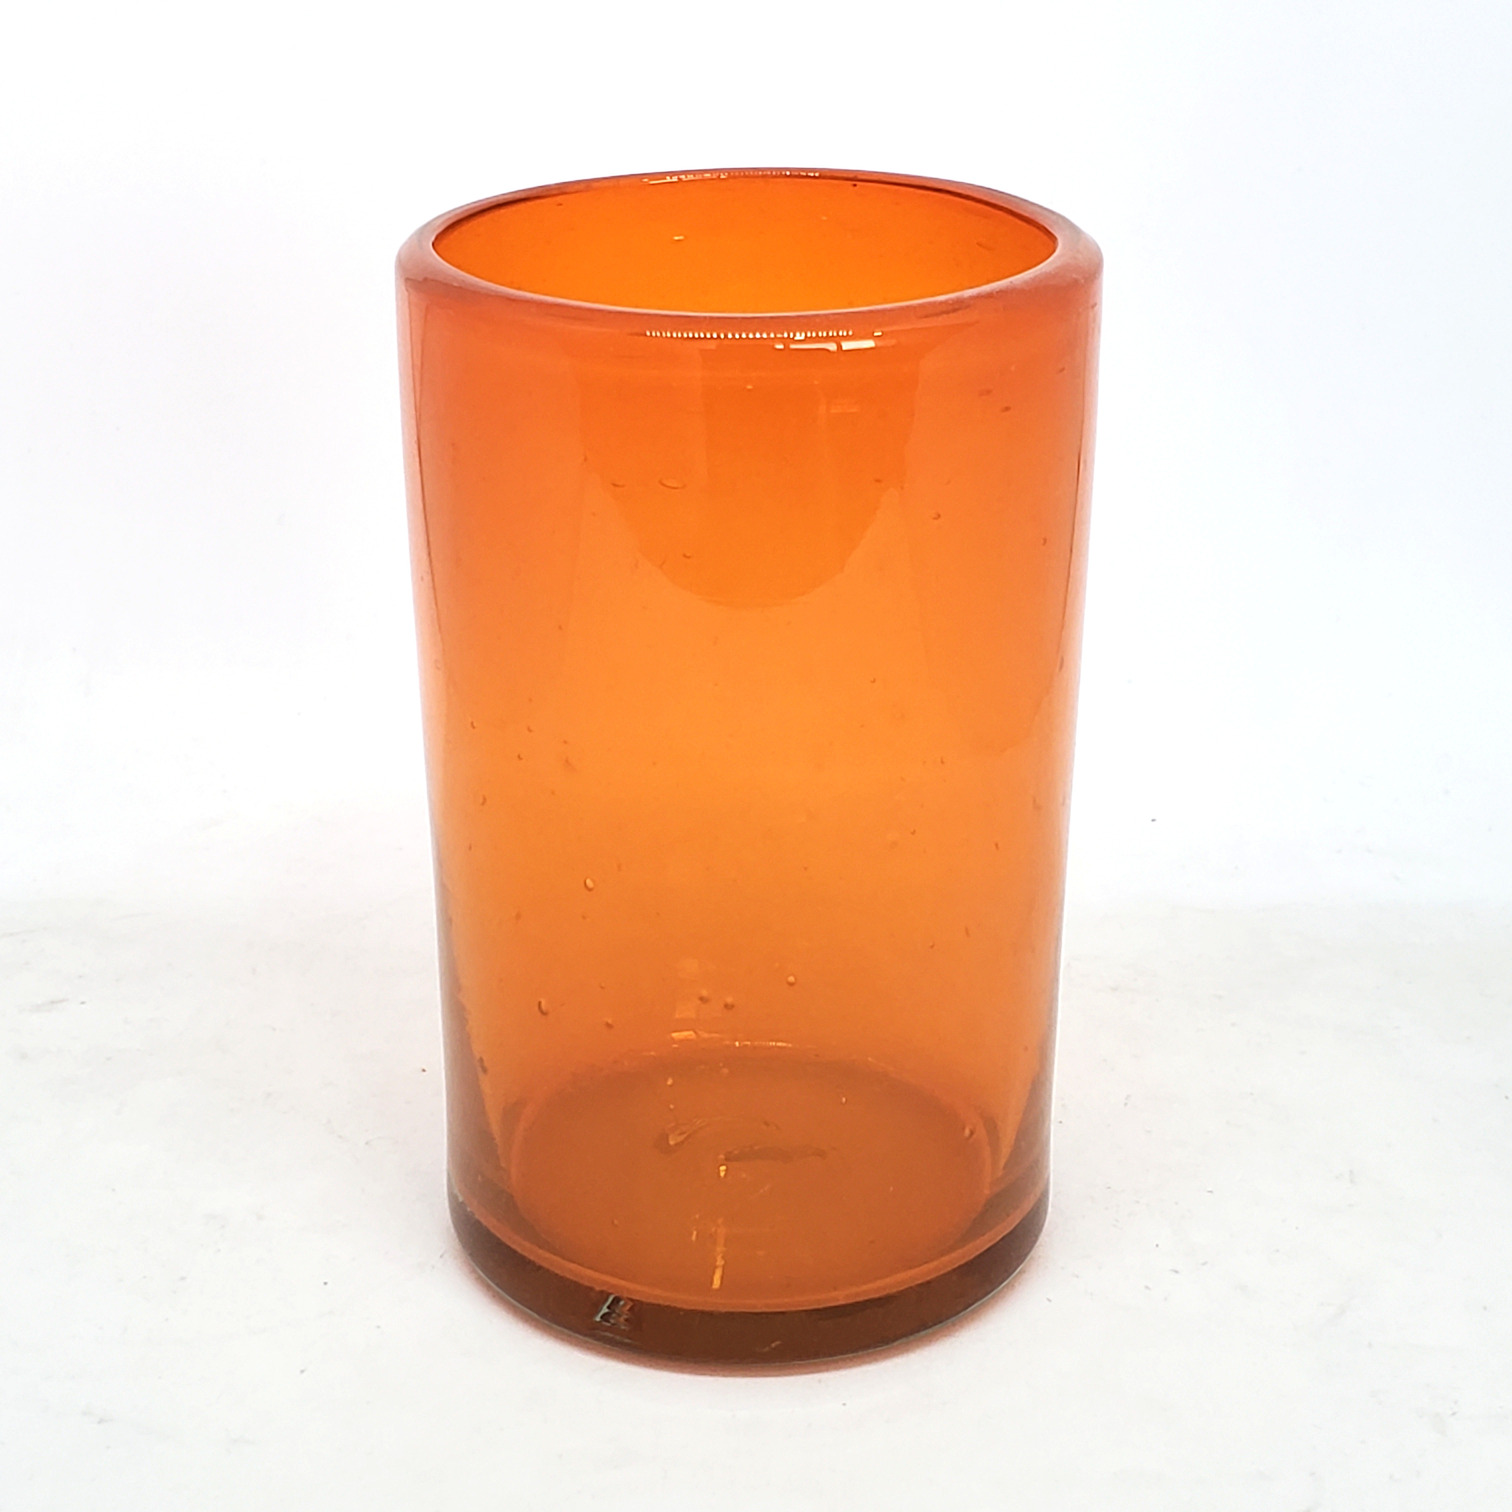 Mexican Glasses / Solid Orange 14 oz Drinking Glasses (set of 6) / These handcrafted glasses deliver a classic touch to your favorite drink.